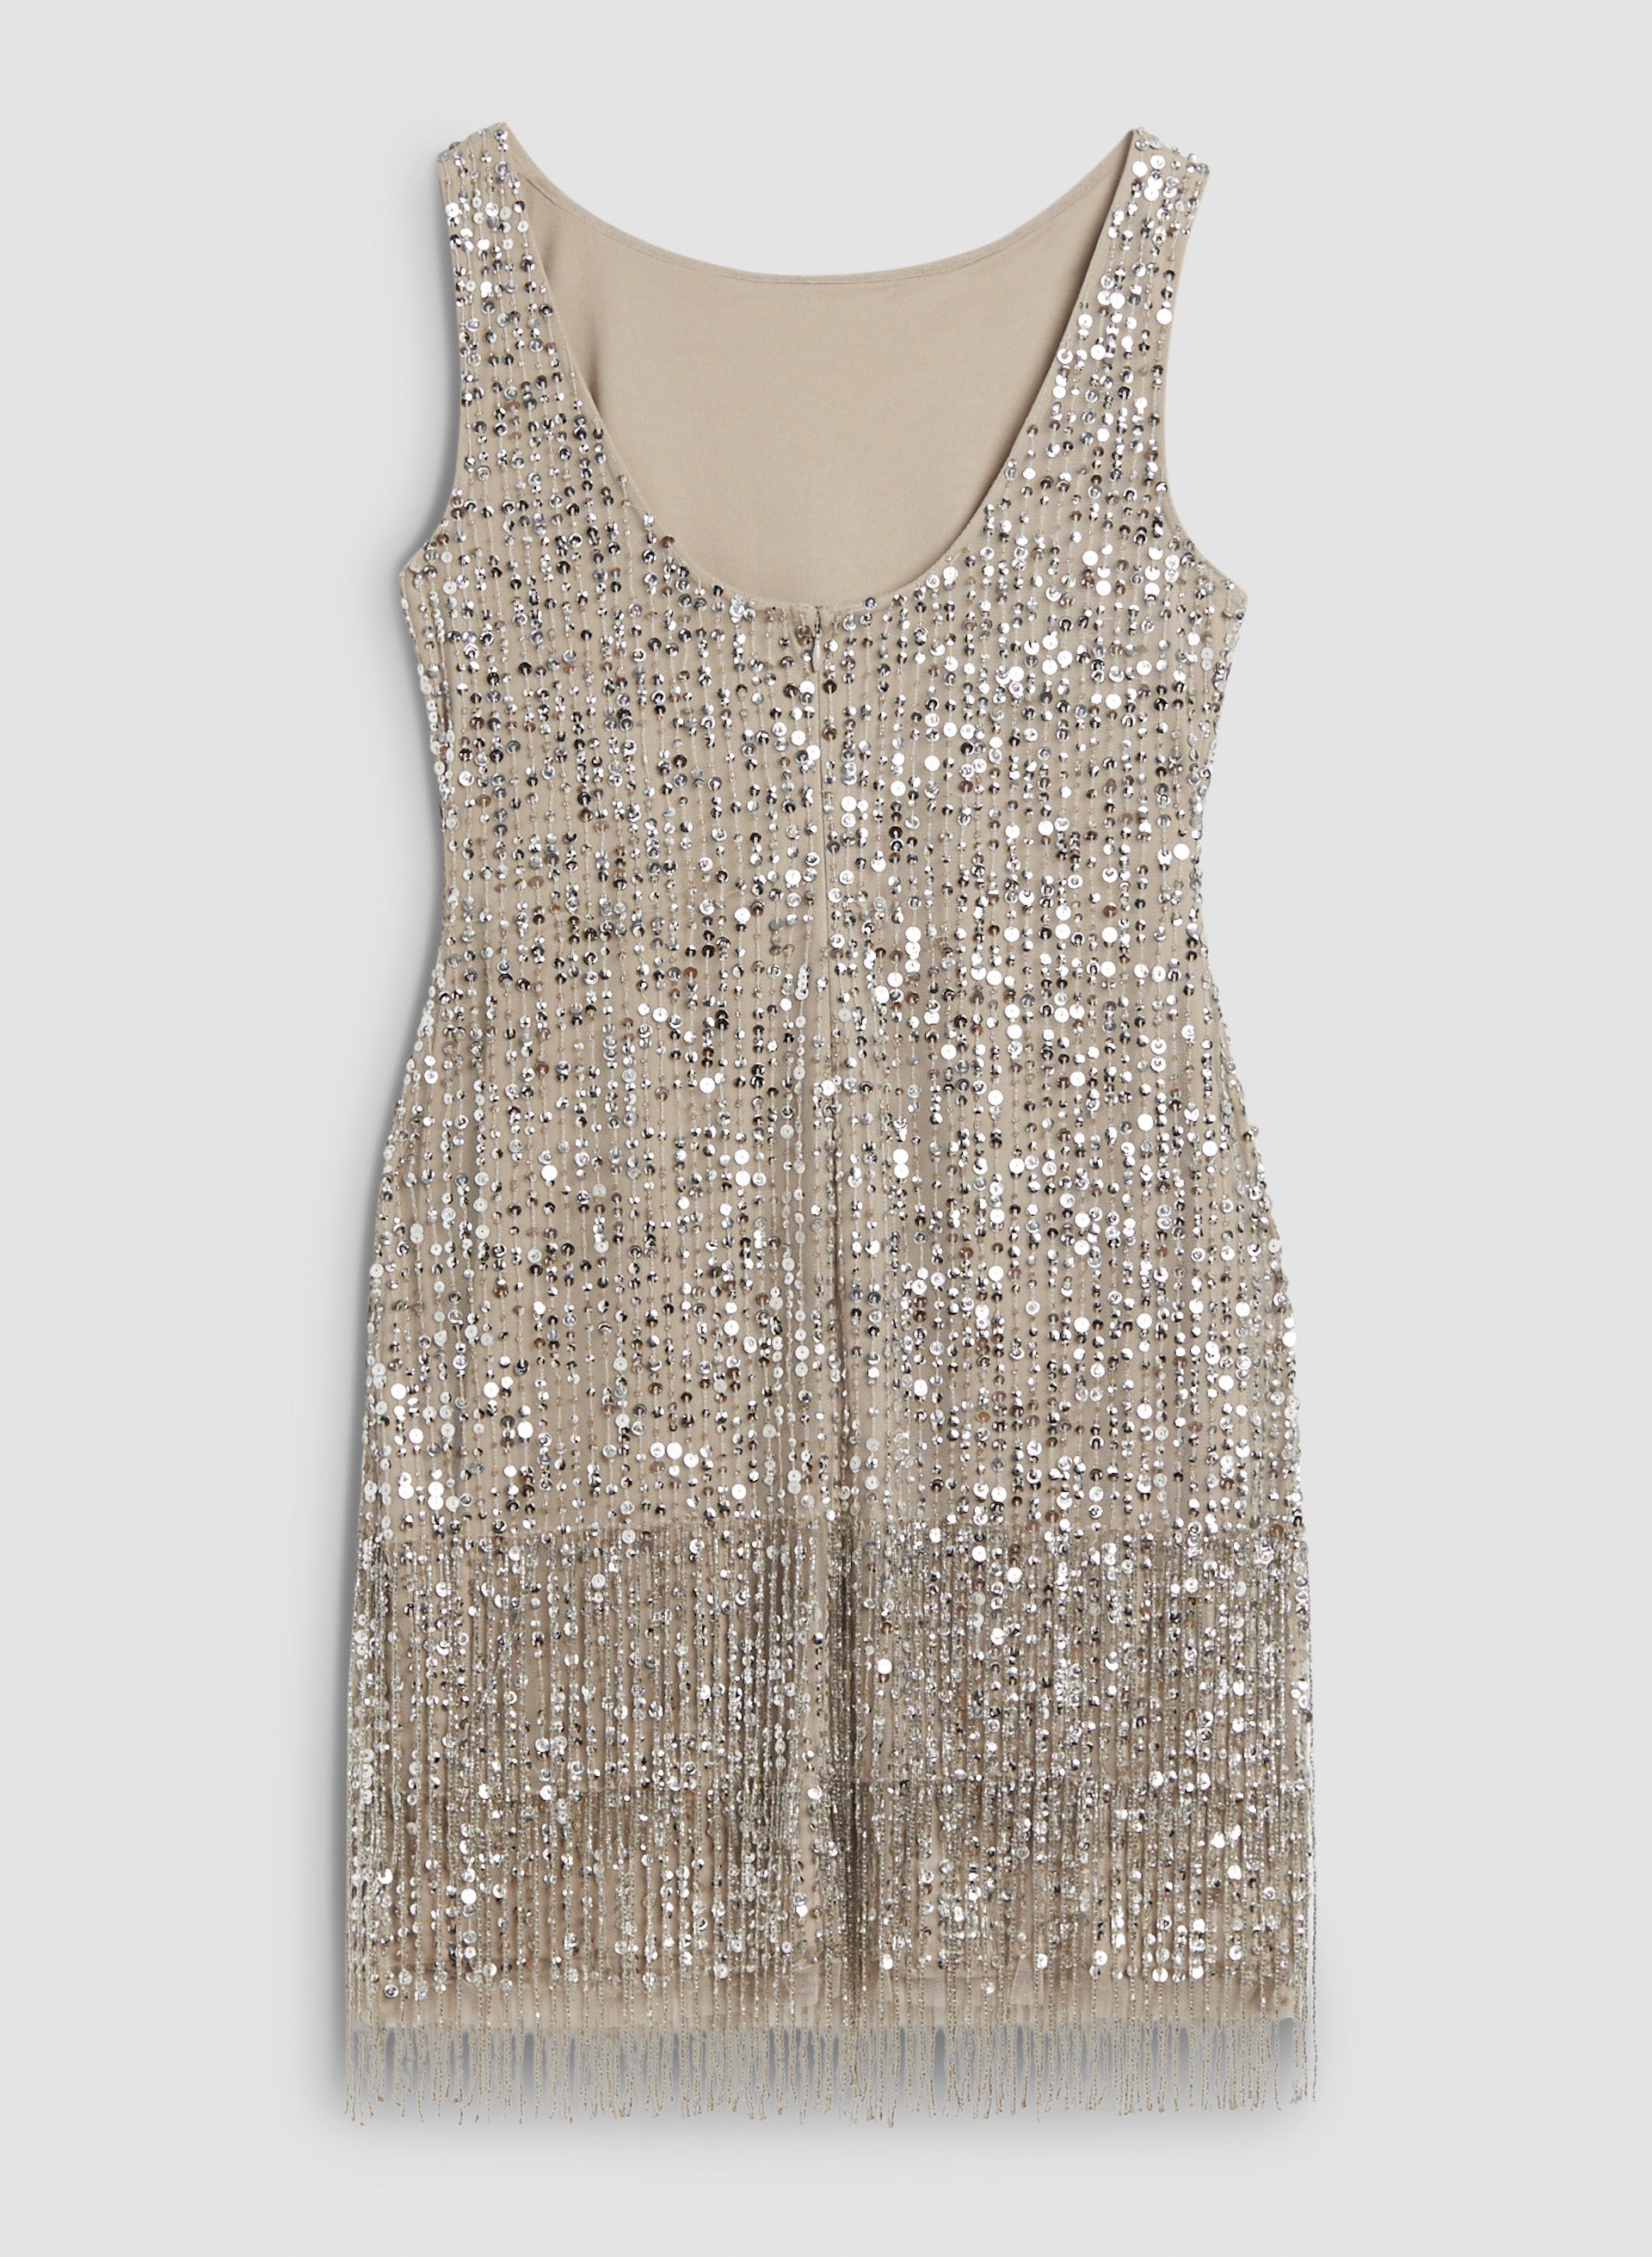 Adrianna Papell - Fringed Sequin Dress